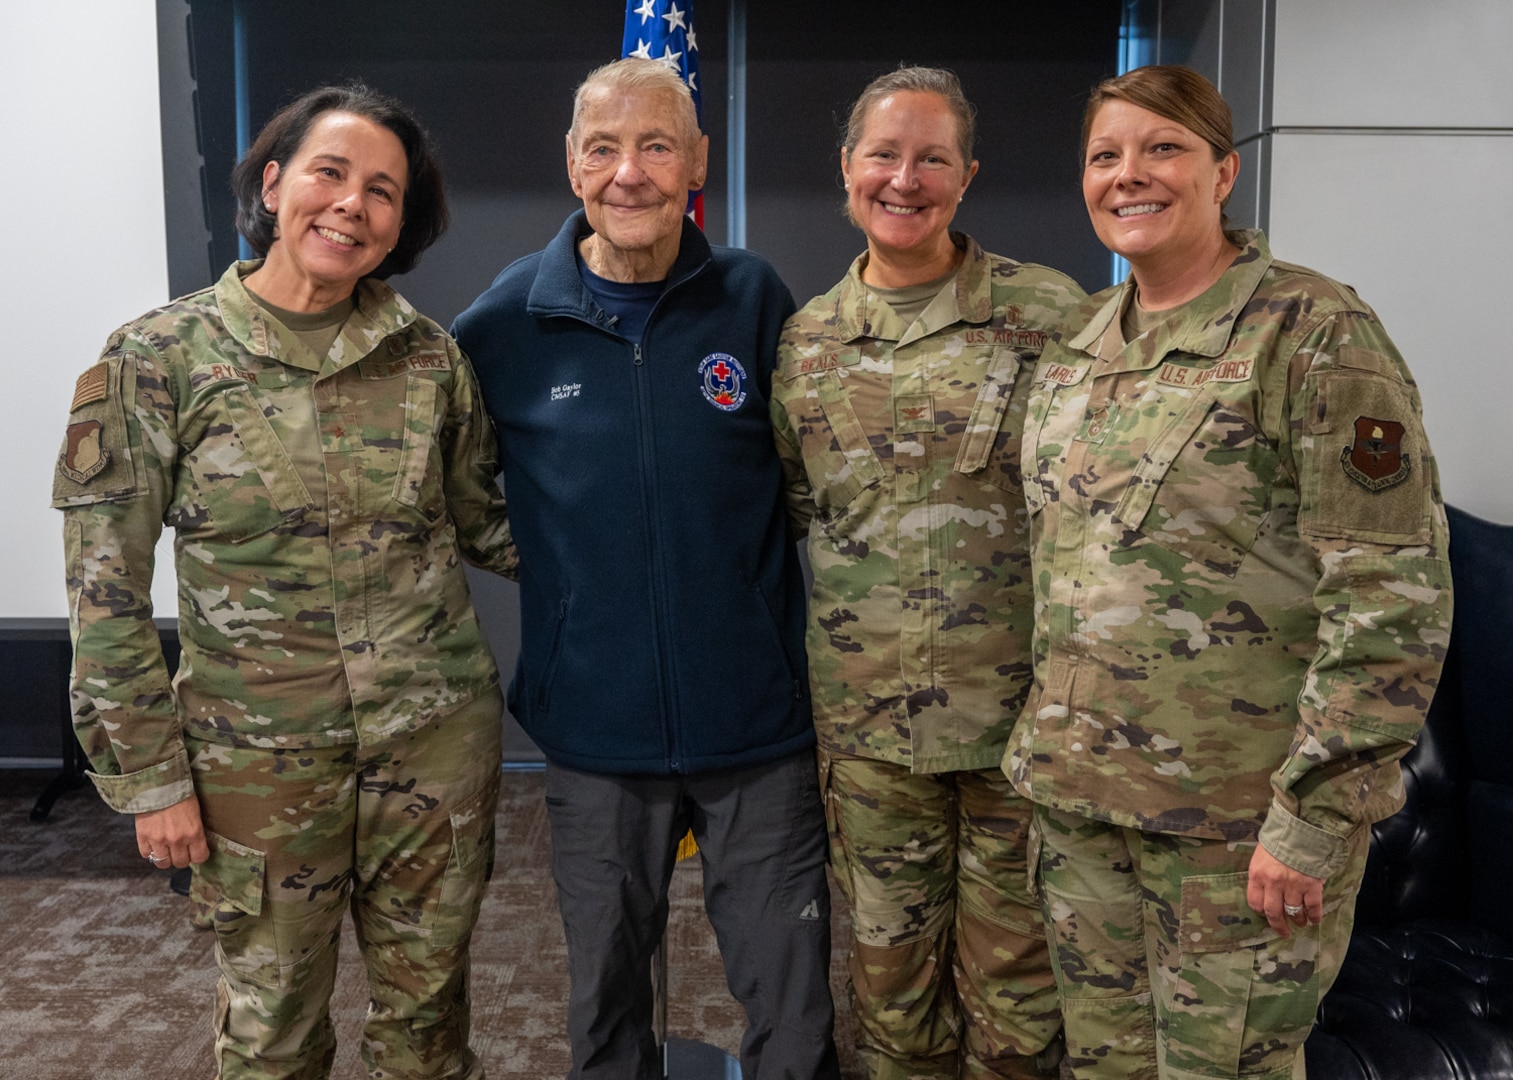 Chief Master Sergeant of the Air Force #5 (ret.) Robert Gaylor poses with Brig. Gen. Jeannine Ryder, 59th Medical Wing commander (left), Col. Kristen Beals, 59th MDW deputy commander (middle right), and Chief Master Sgt. Kristy Earls, 59th MDW command chief (right), at Wilford Hall Ambulatory Surgical Center, Joint Base San Antonio-Lackland, Texas, Aug. 2, 2023. As CMSAF, Gaylor traveled extensively, listening to Airmen and discussing changes such as maternity uniforms for female Airmen, and addressing an ongoing institutional drug and alcohol problem. (U.S. Air Force photo by Senior Airman Melody Bordeaux)